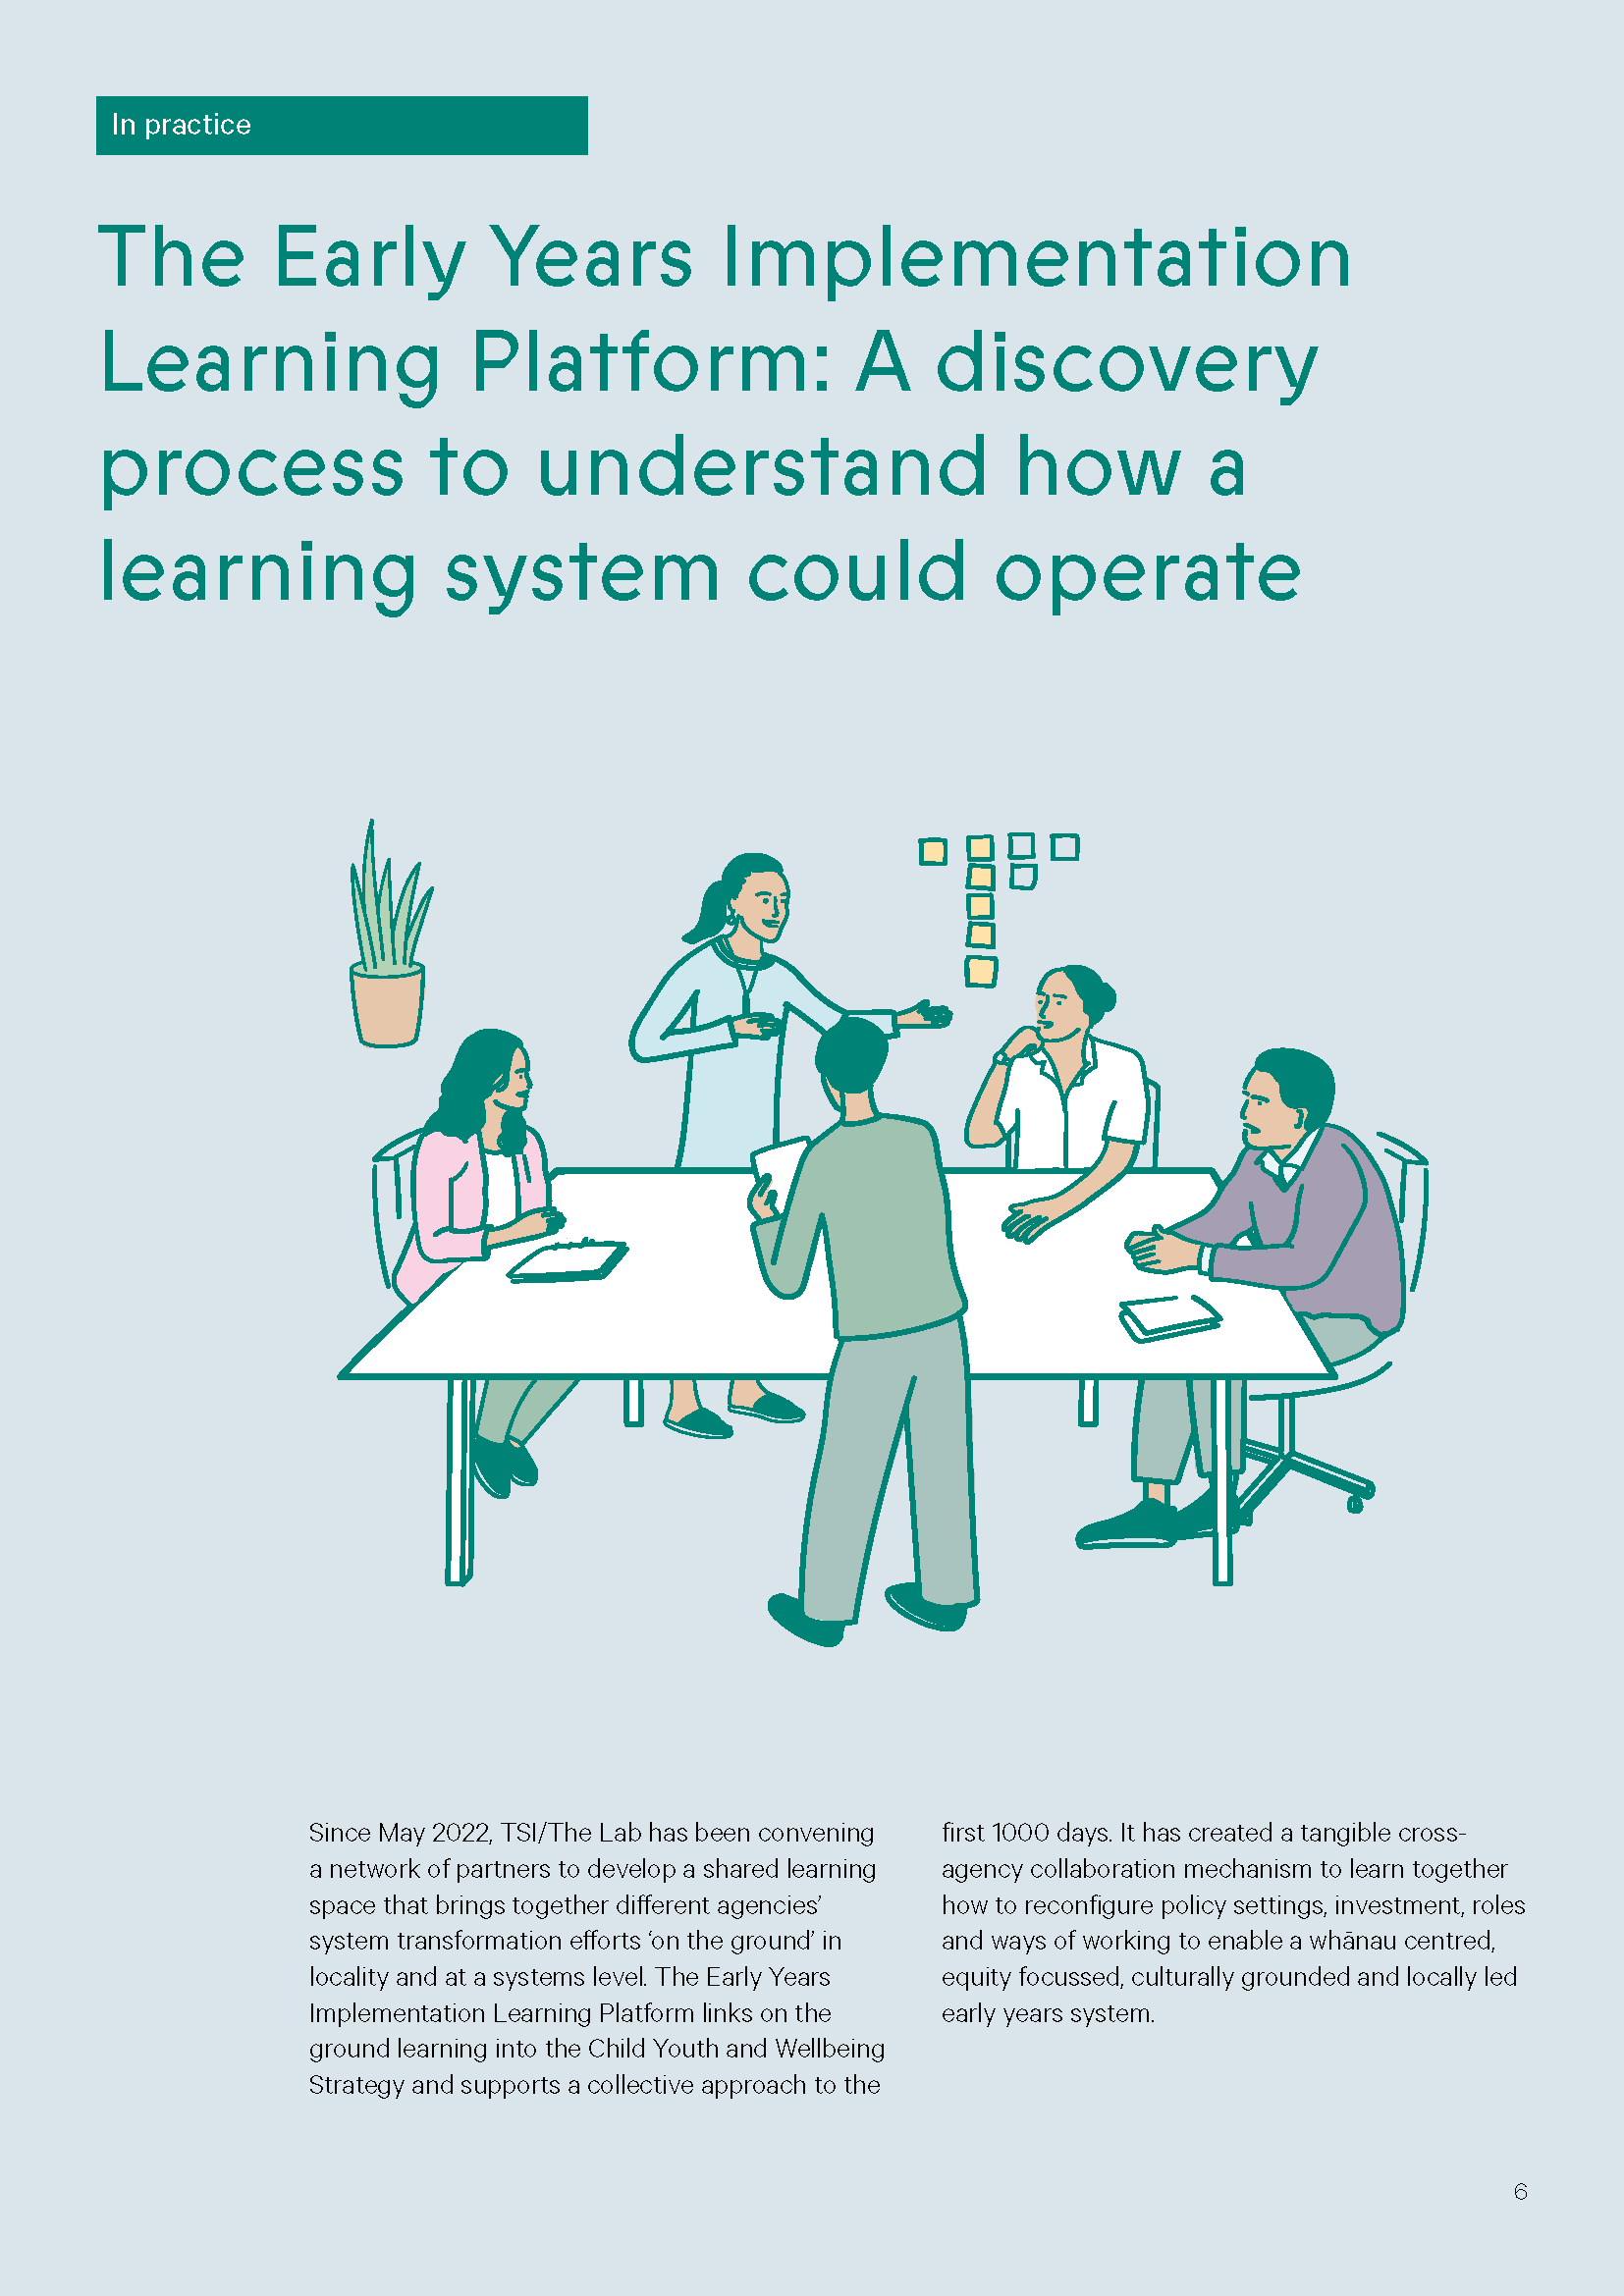 A First 1000 Days Learning System Nov 23_Page_06.png